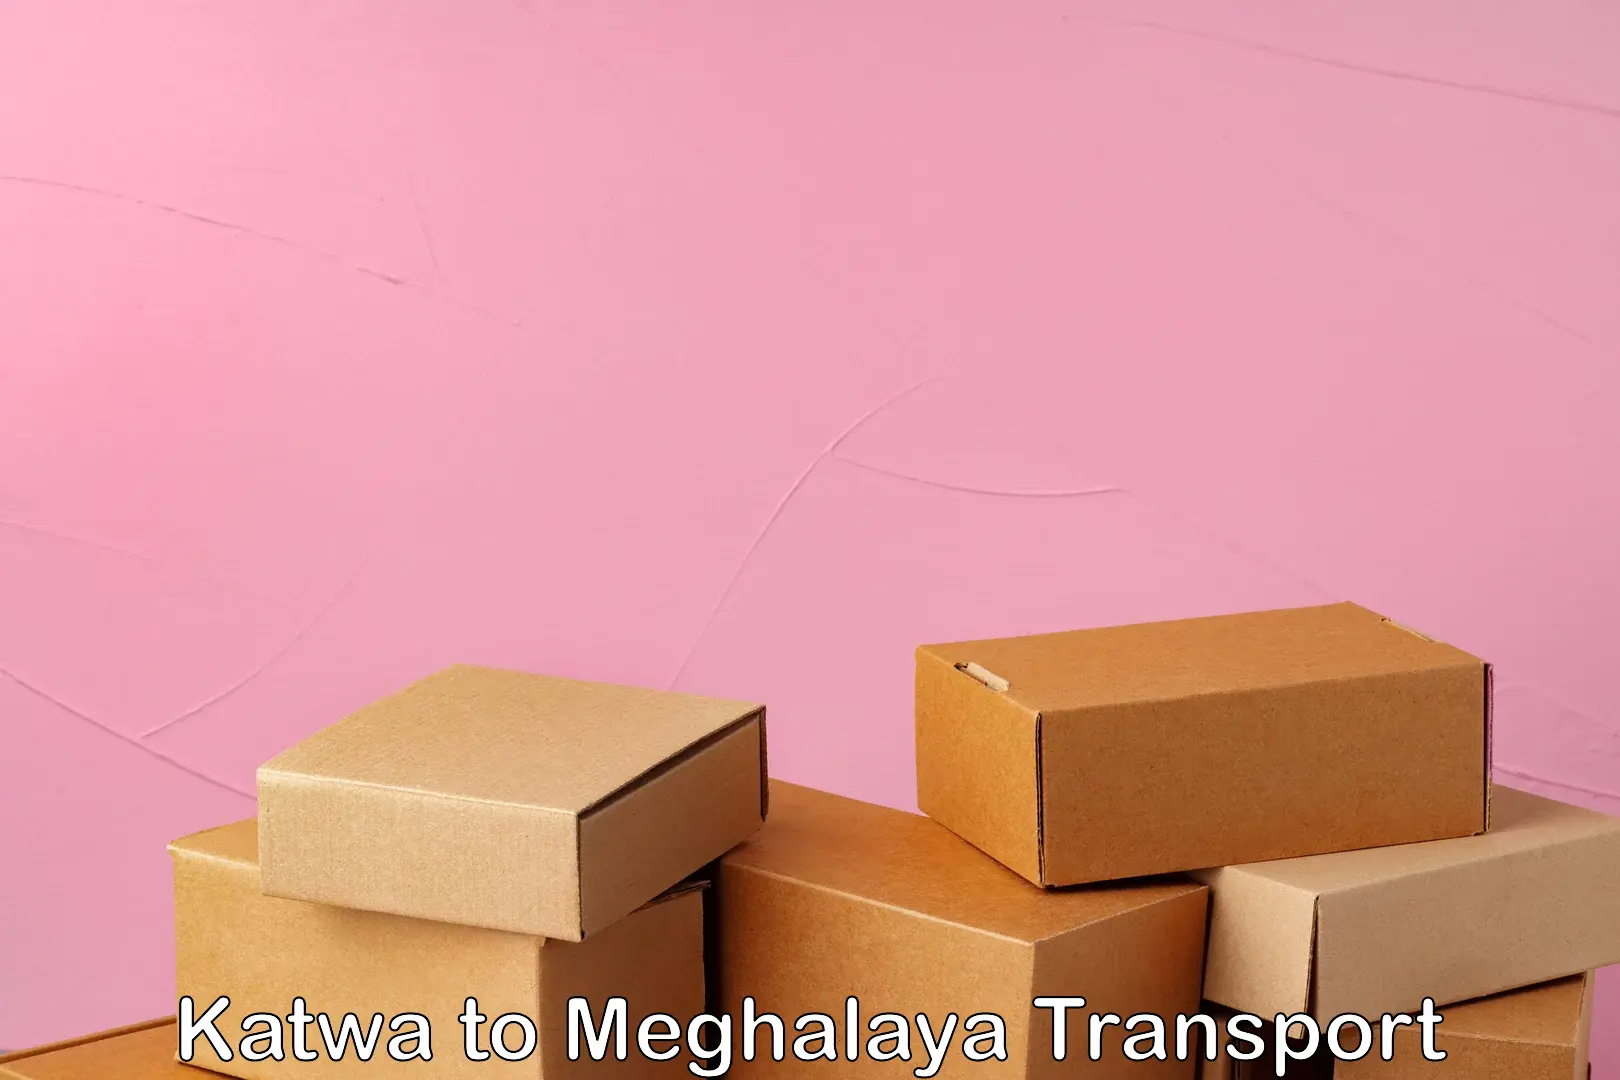 Air freight transport services in Katwa to Meghalaya